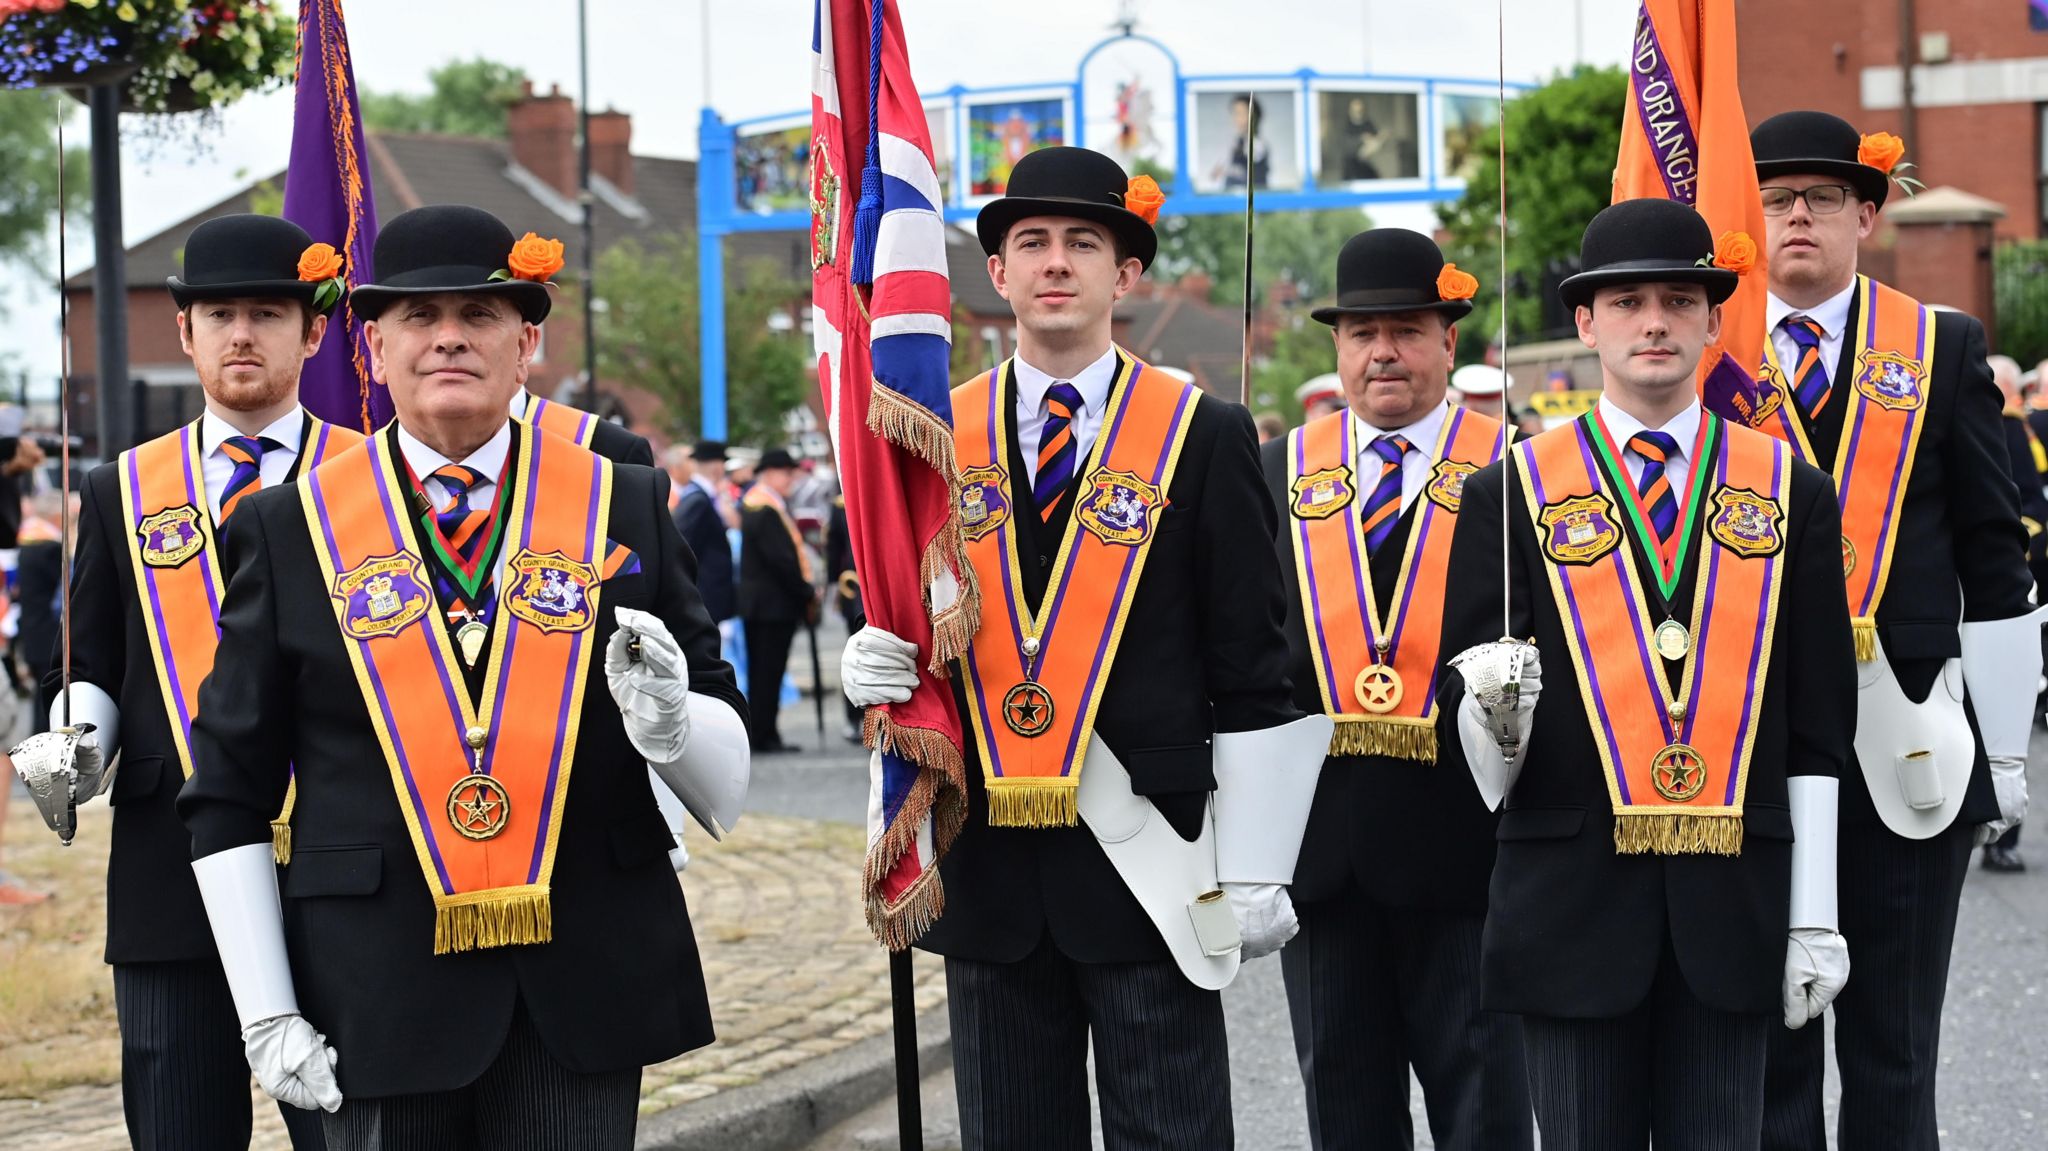 The annual 12 July parades are organised by the Orange Order